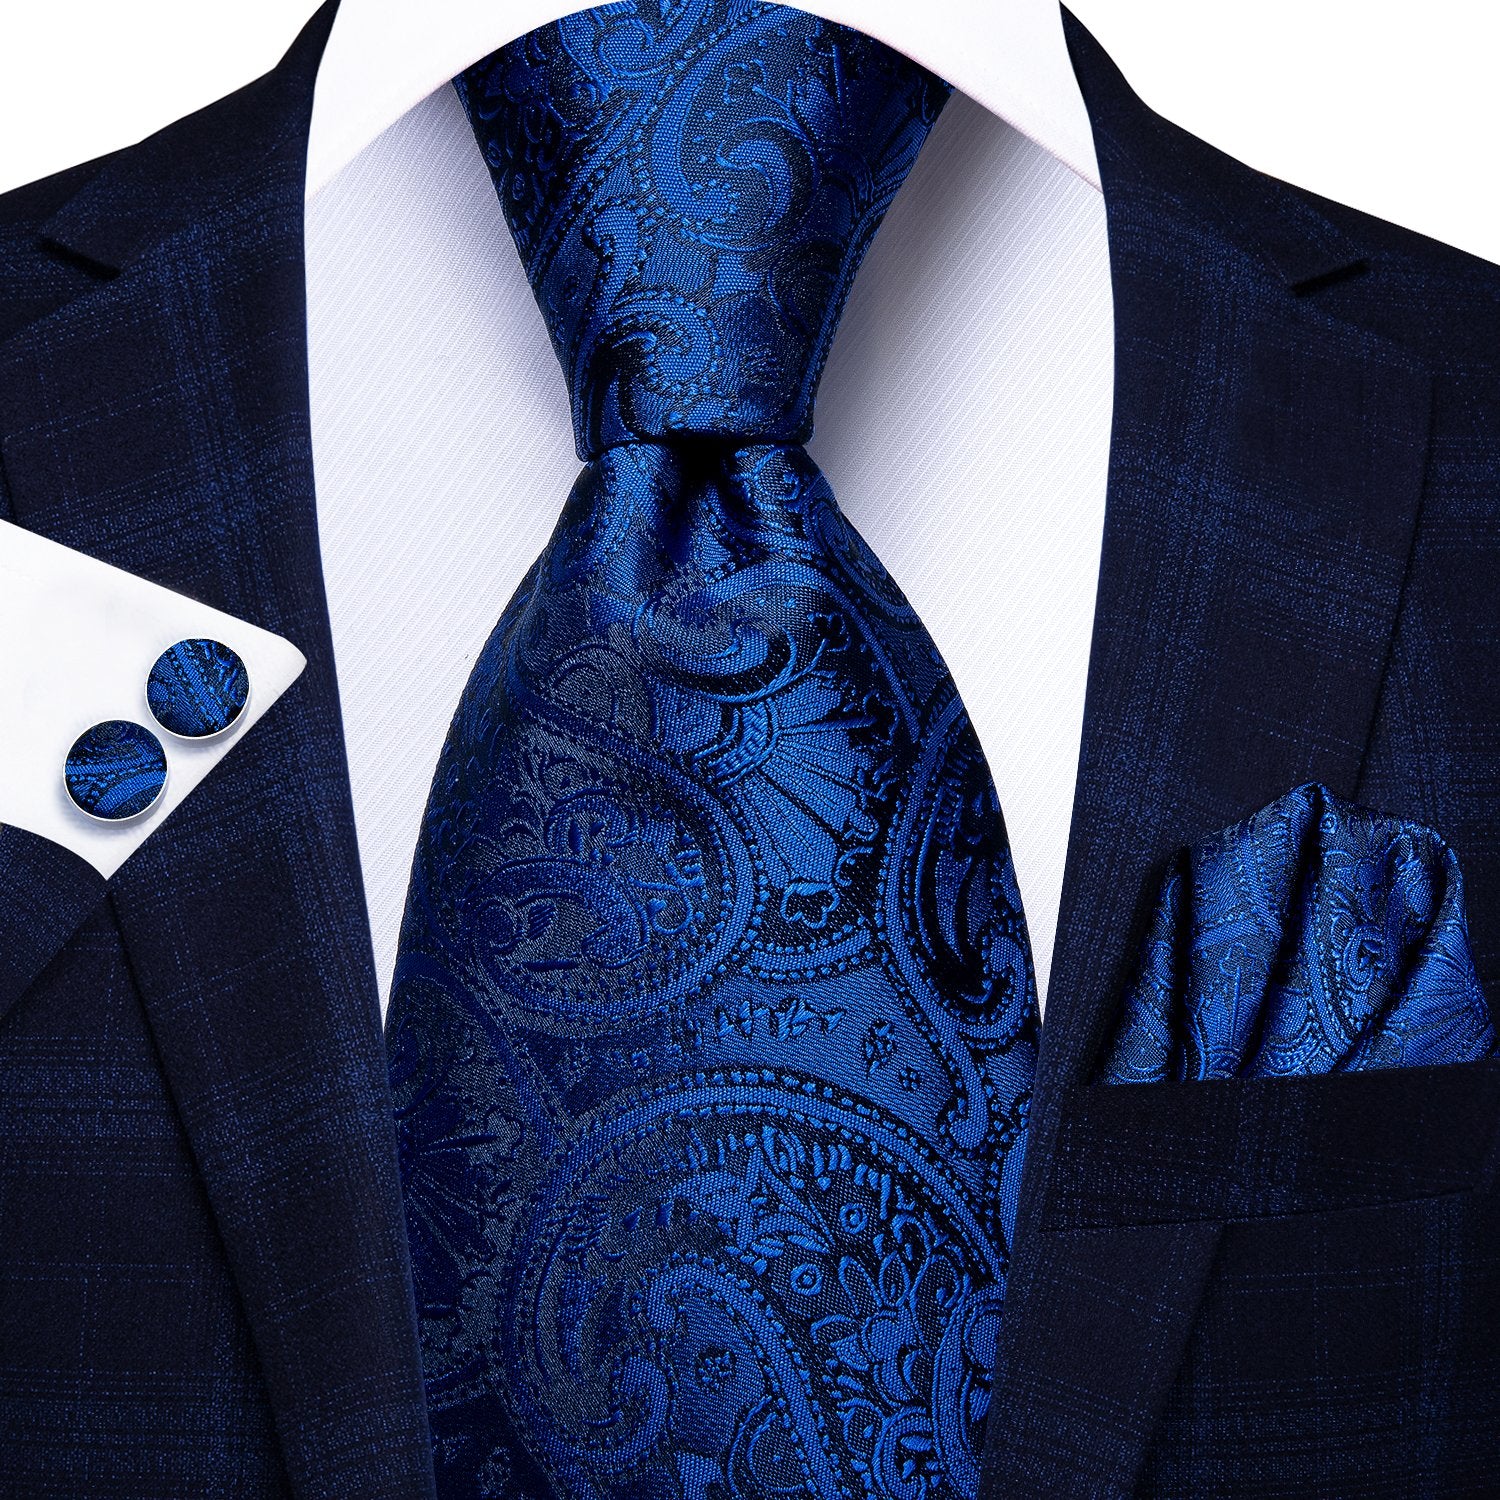 Fanstastic Blue Paisley Tie Pocket Square Cufflinks Set with Brooch